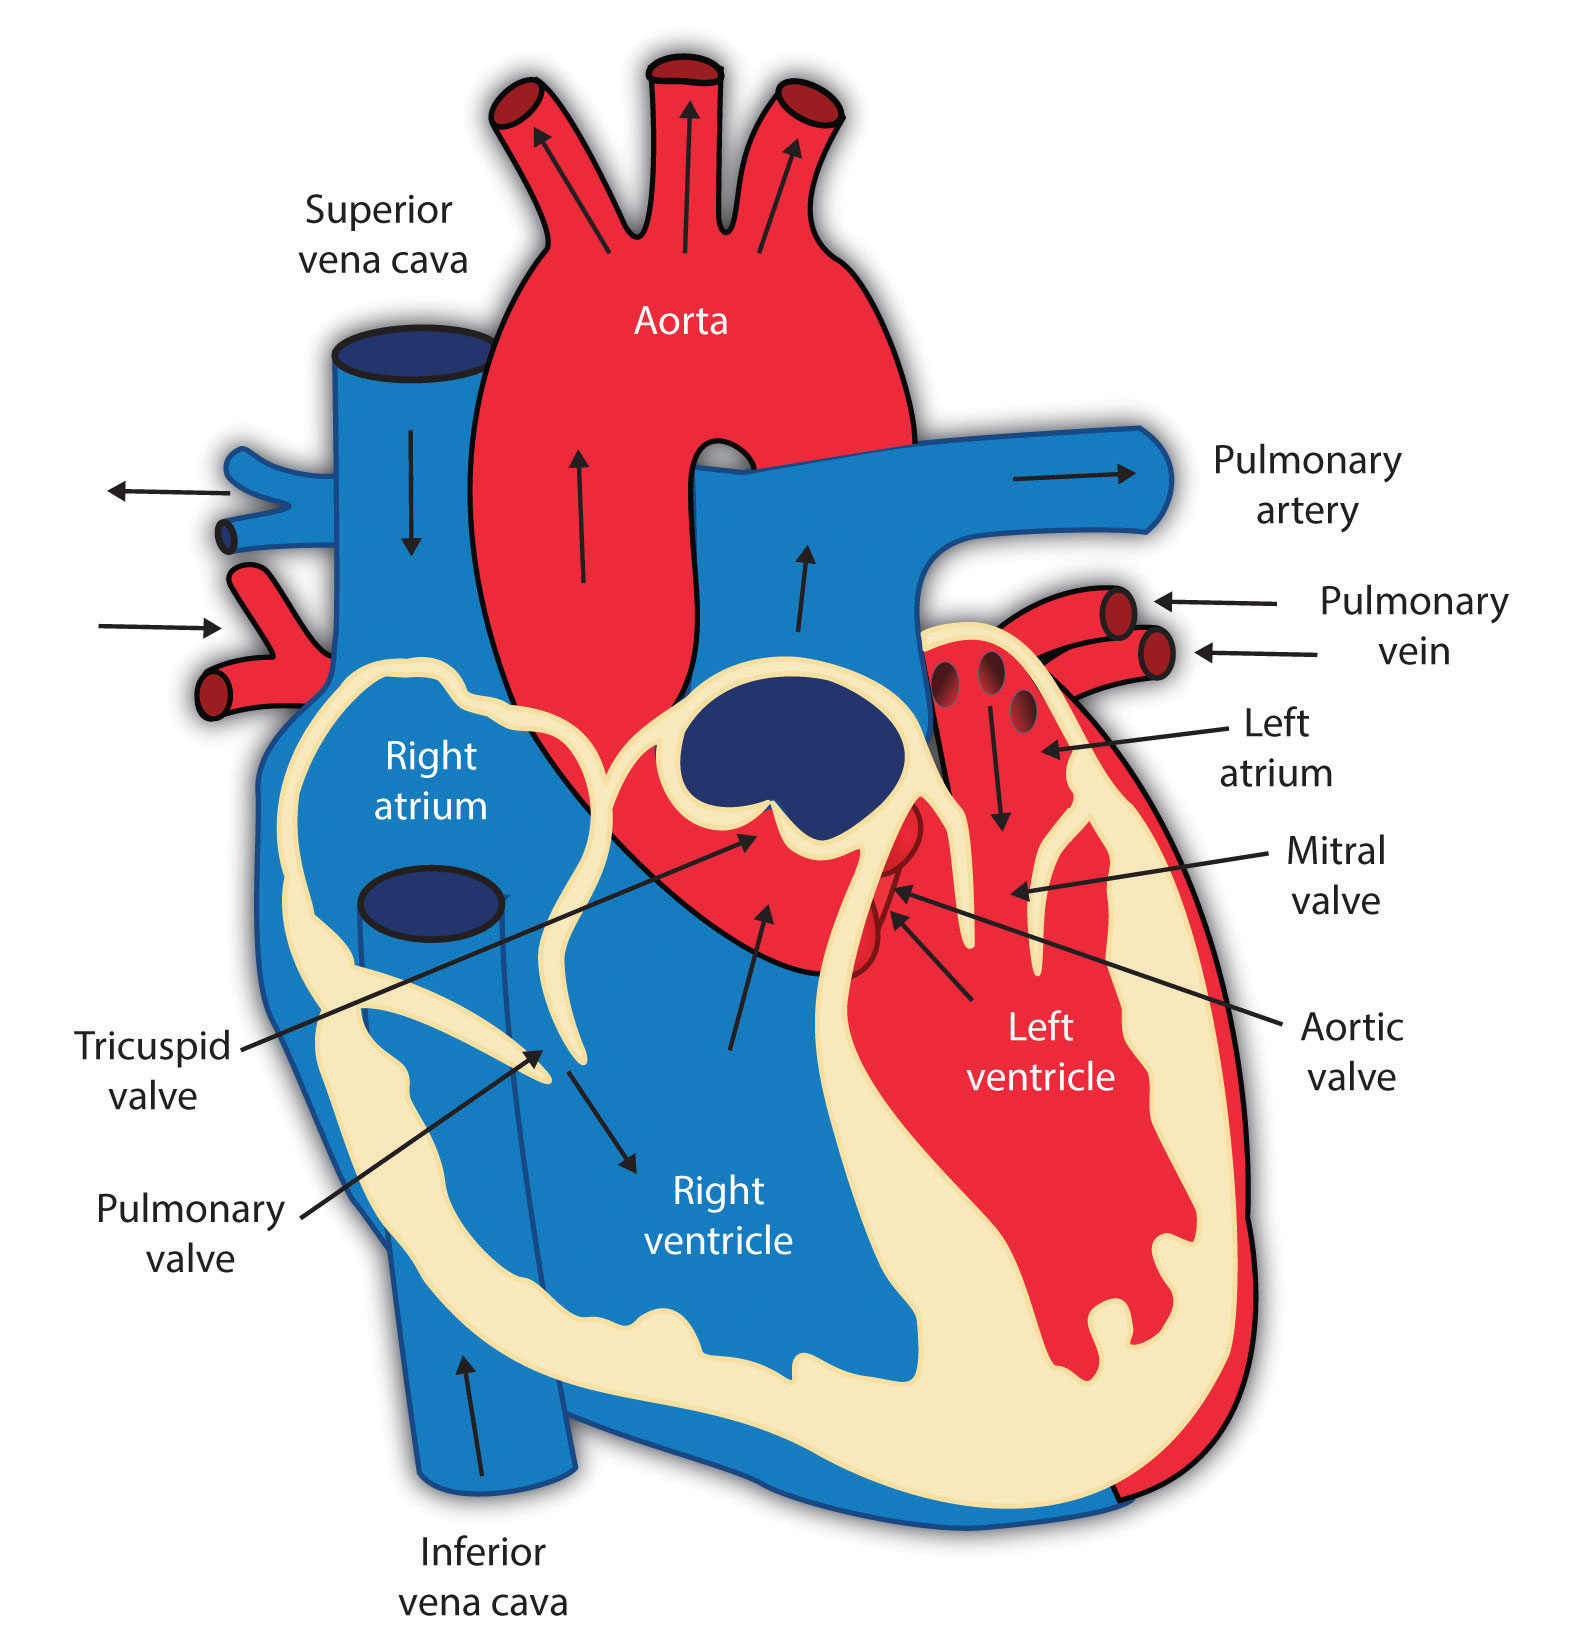 Lovely Cardiovascular System 20 For Your human anatomy coloring book ...